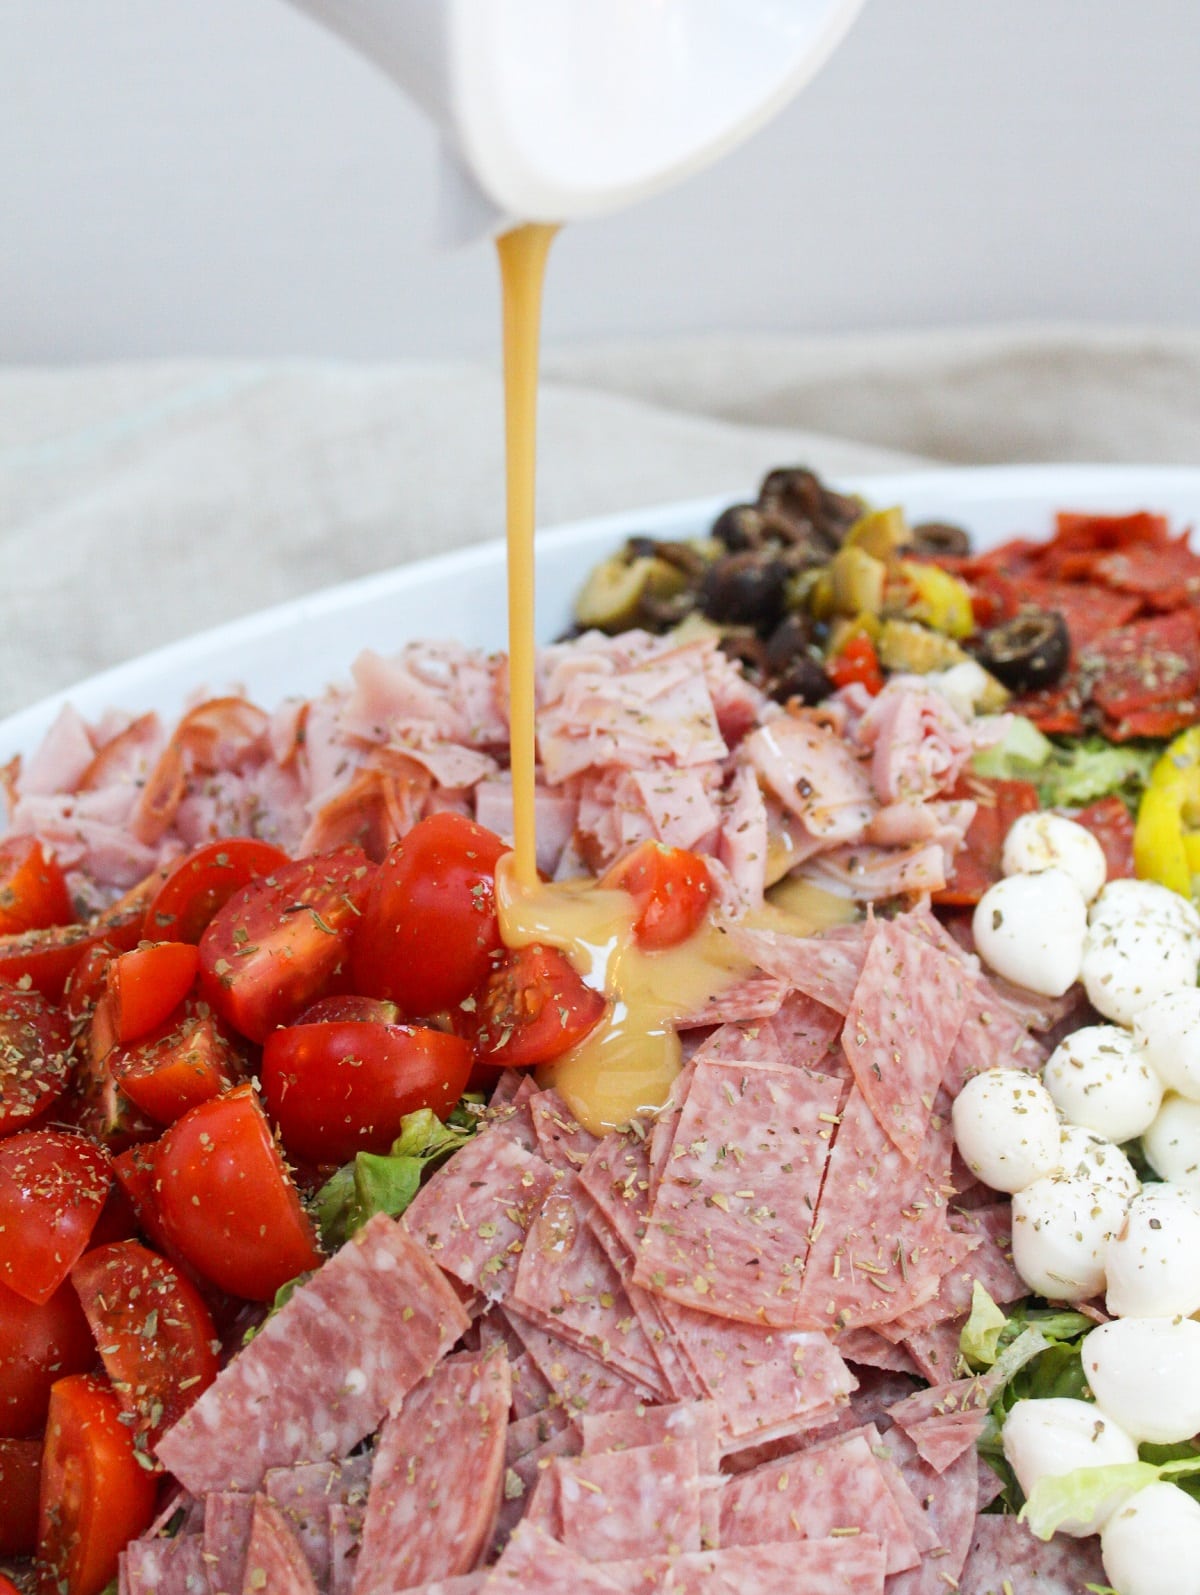 Italian sub salad with tomatoes, pepperoni, ham, olives, and cheese on a plate with ingredients unmixed. The dressing is poured over the salad.